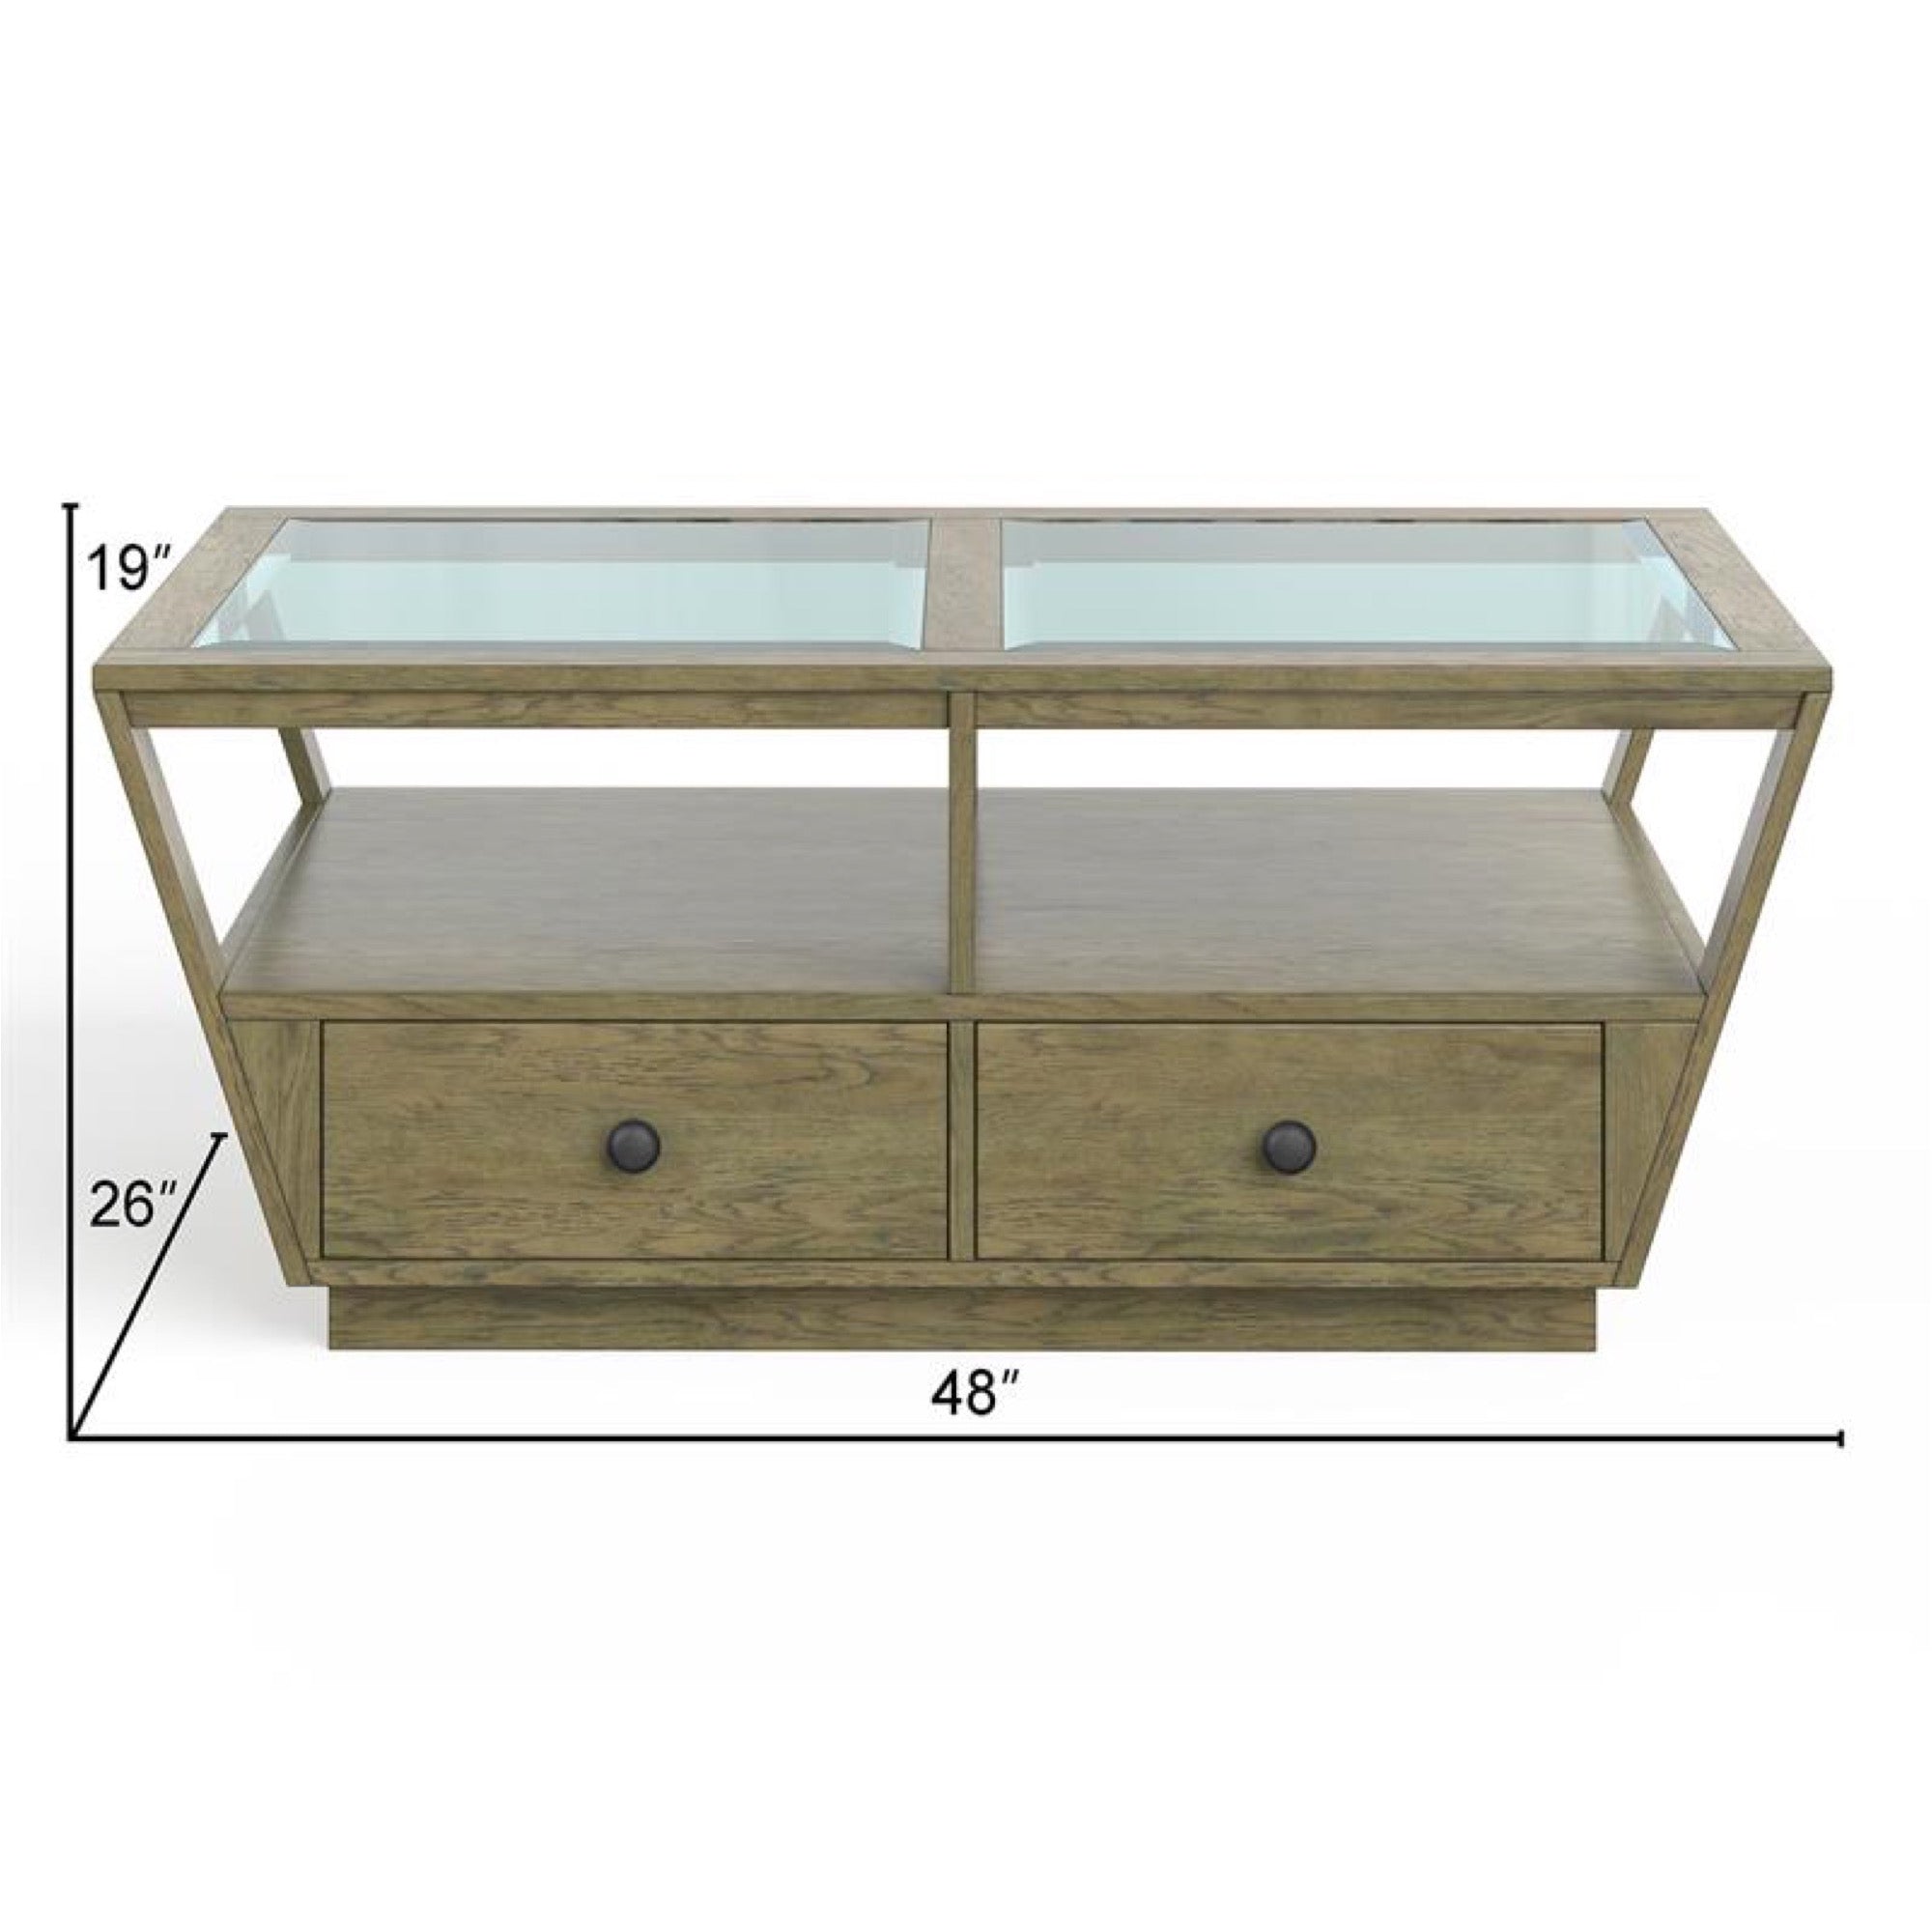 Hardison Rectangular Cocktail Table w/Casters